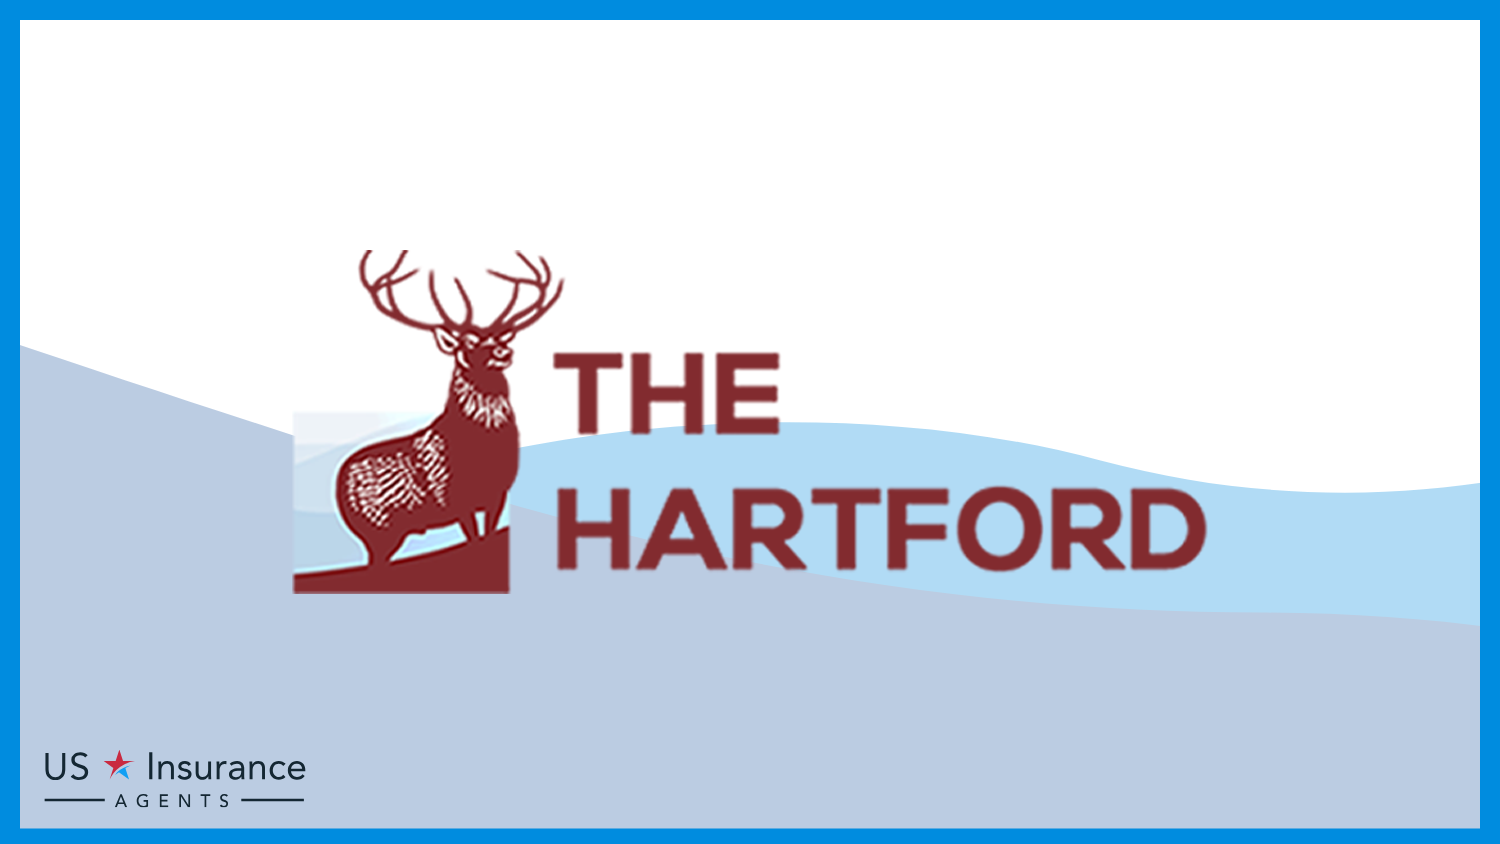 The Hartford: Best Business Insurance for Investment Services